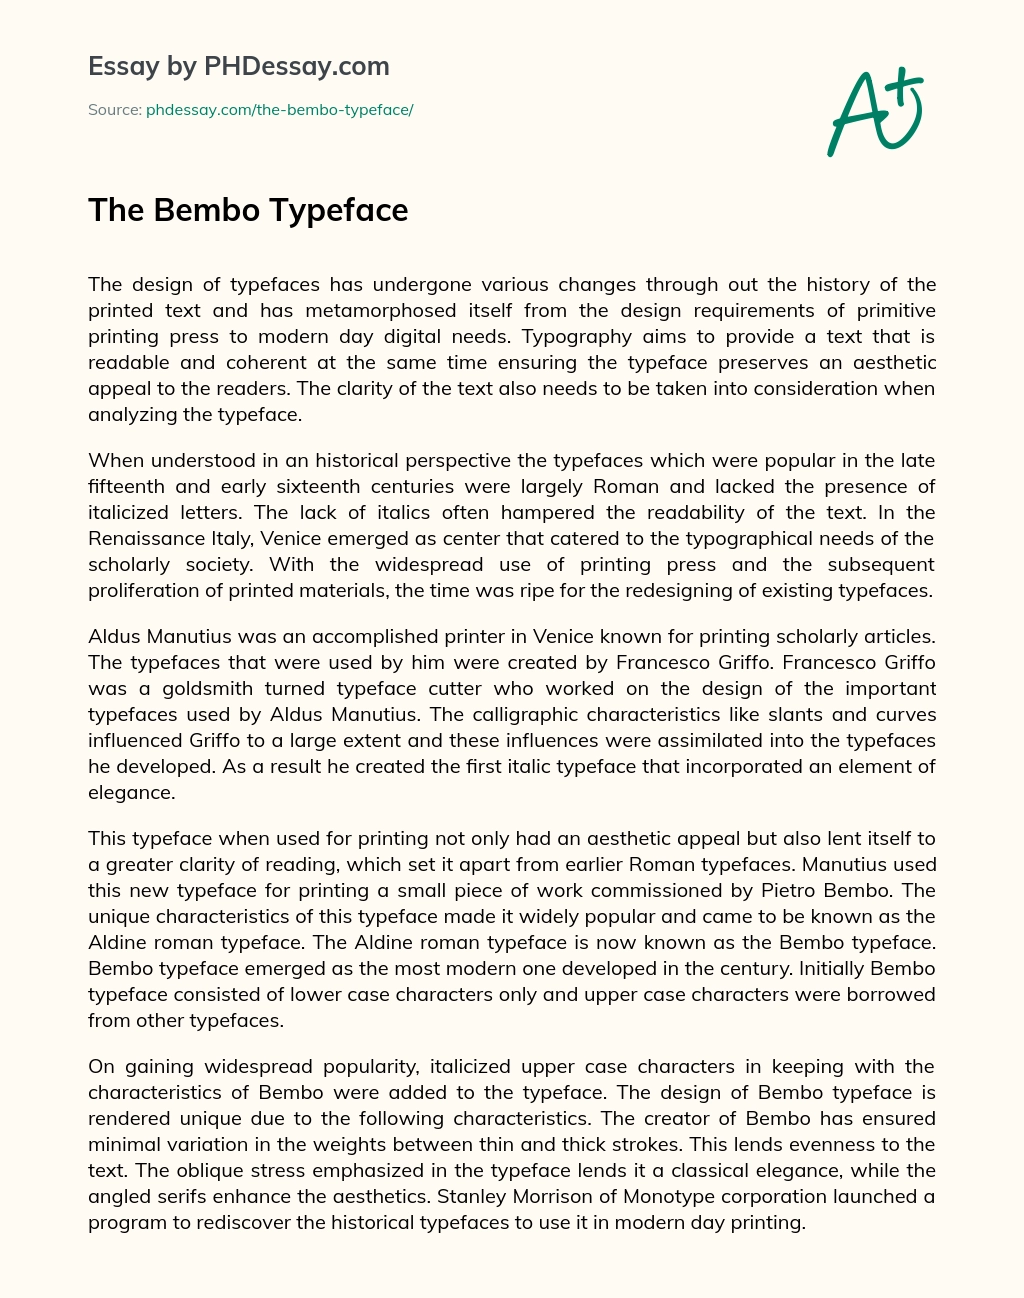 The Bembo Typeface essay